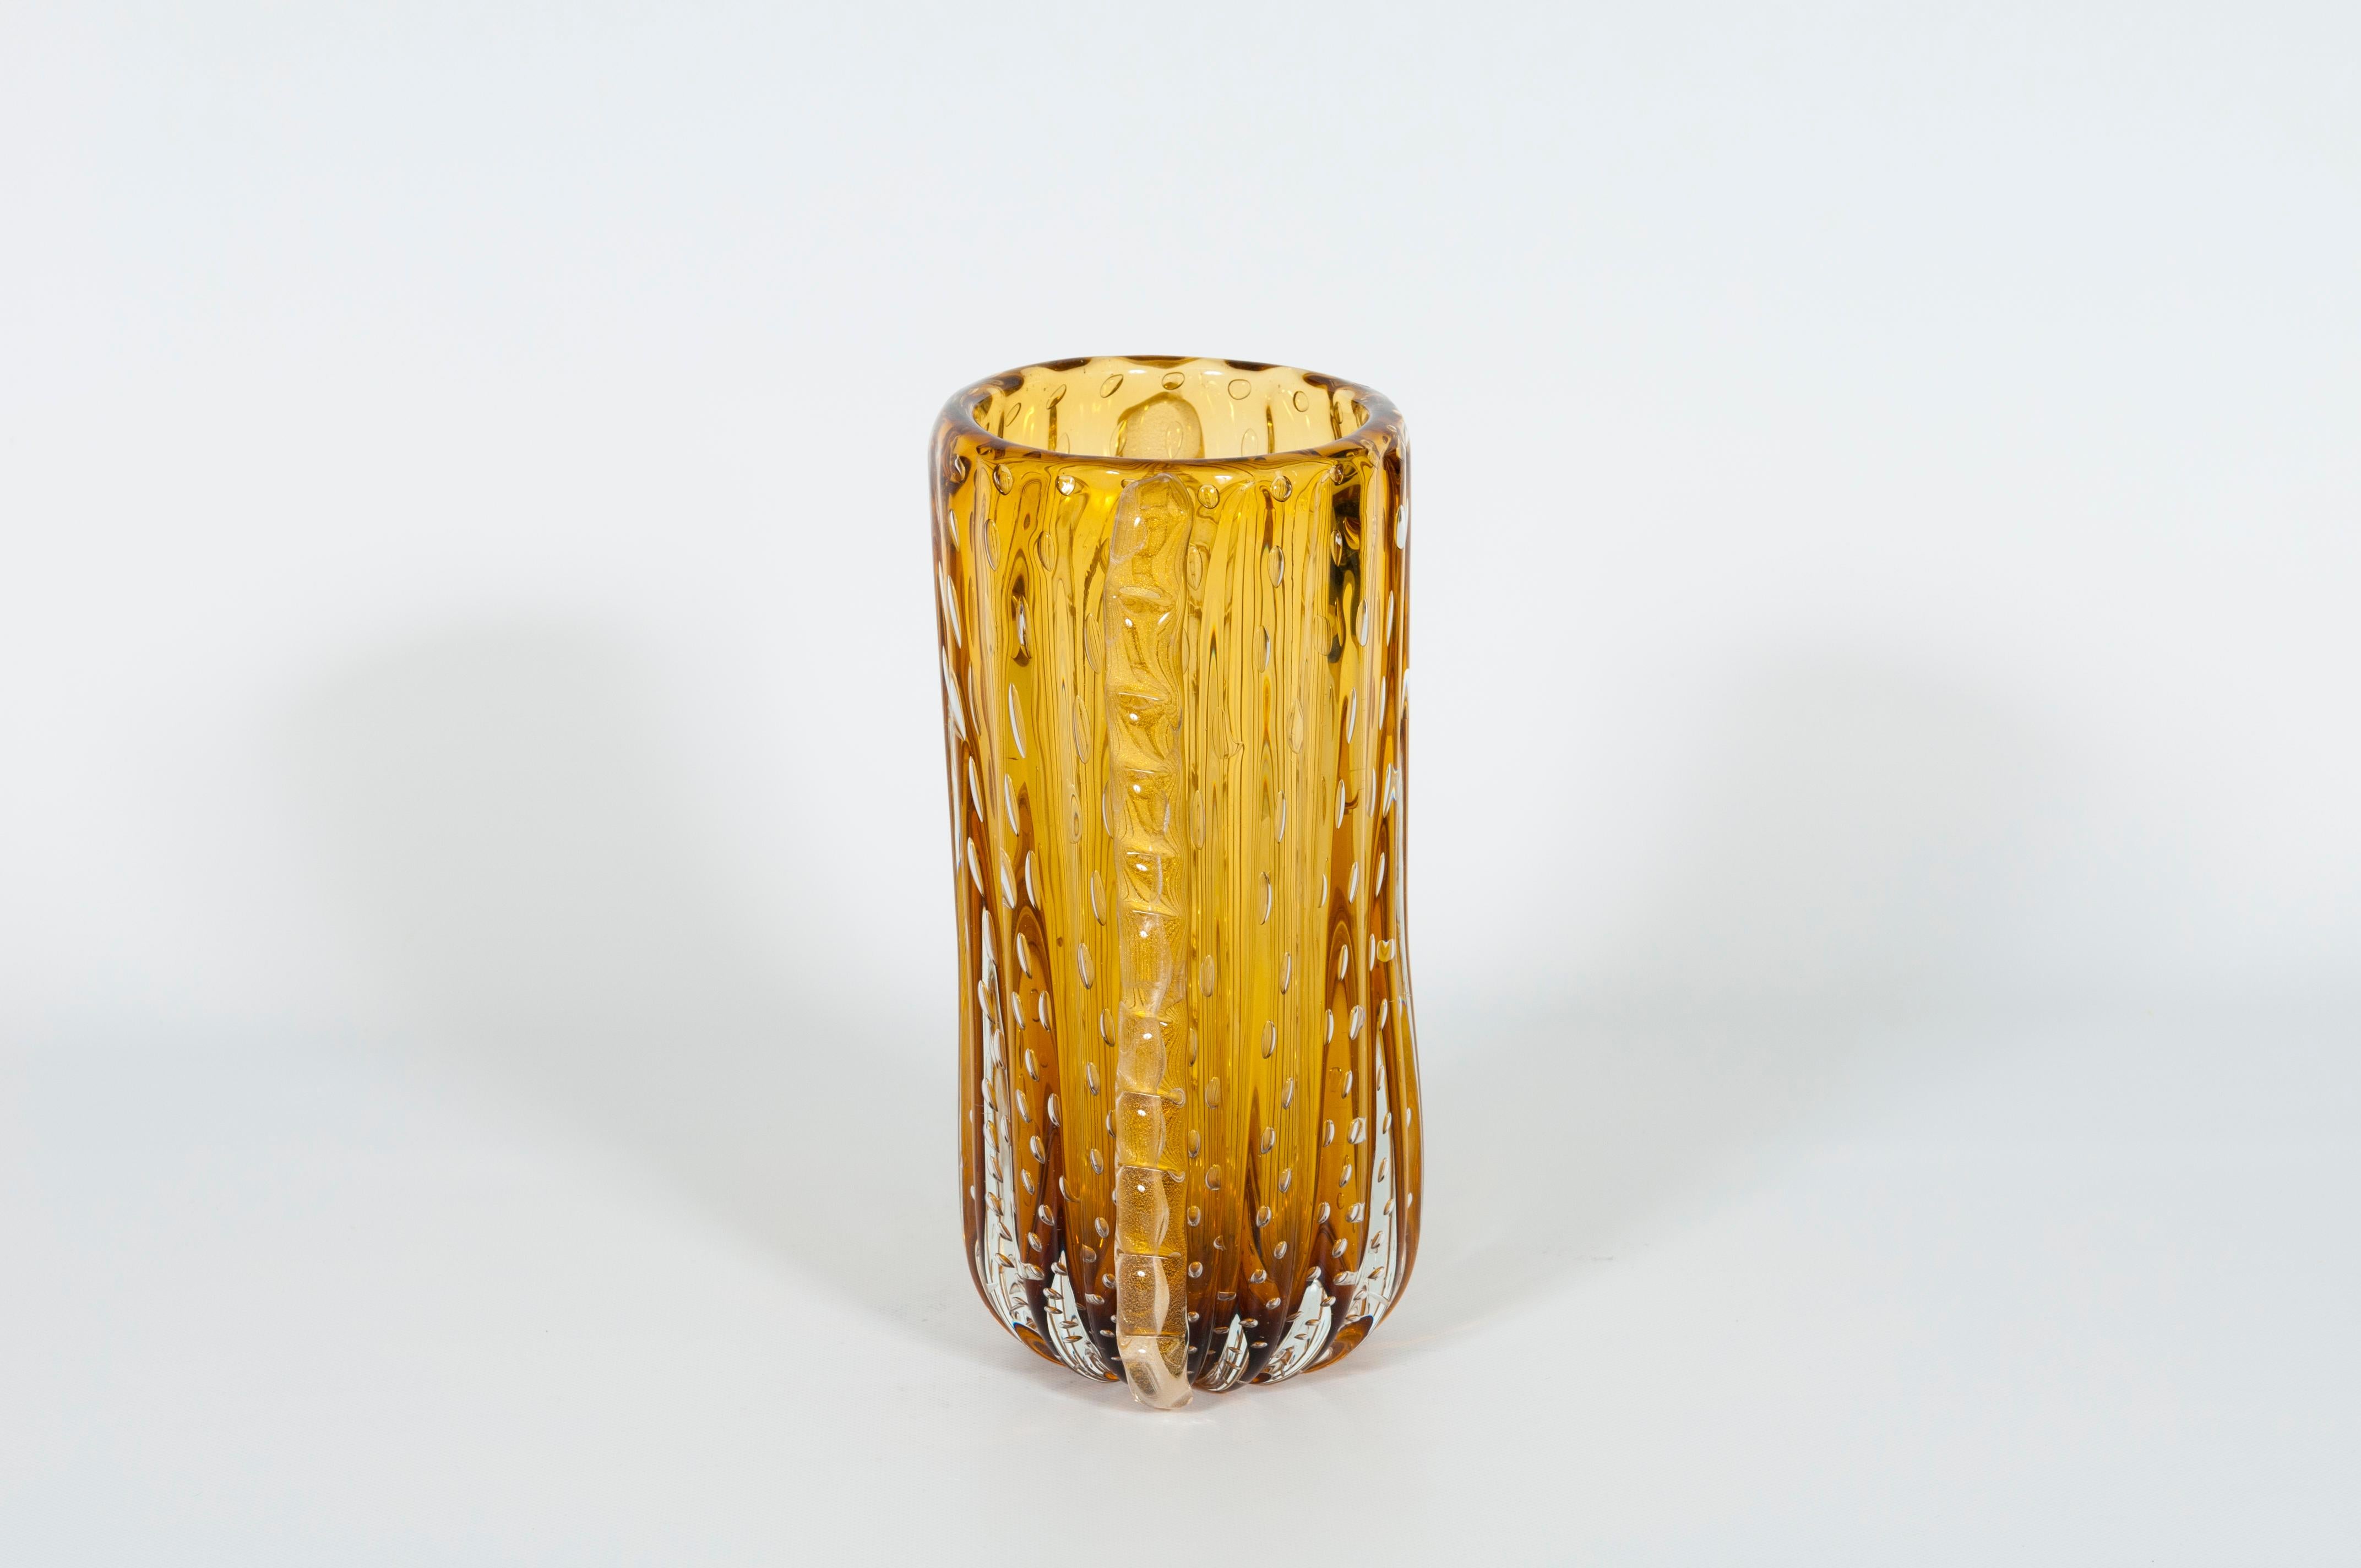 Amber Color Murano Glass Bubble Vase with Morise Attributed to Donà, 1980s Italy For Sale 3